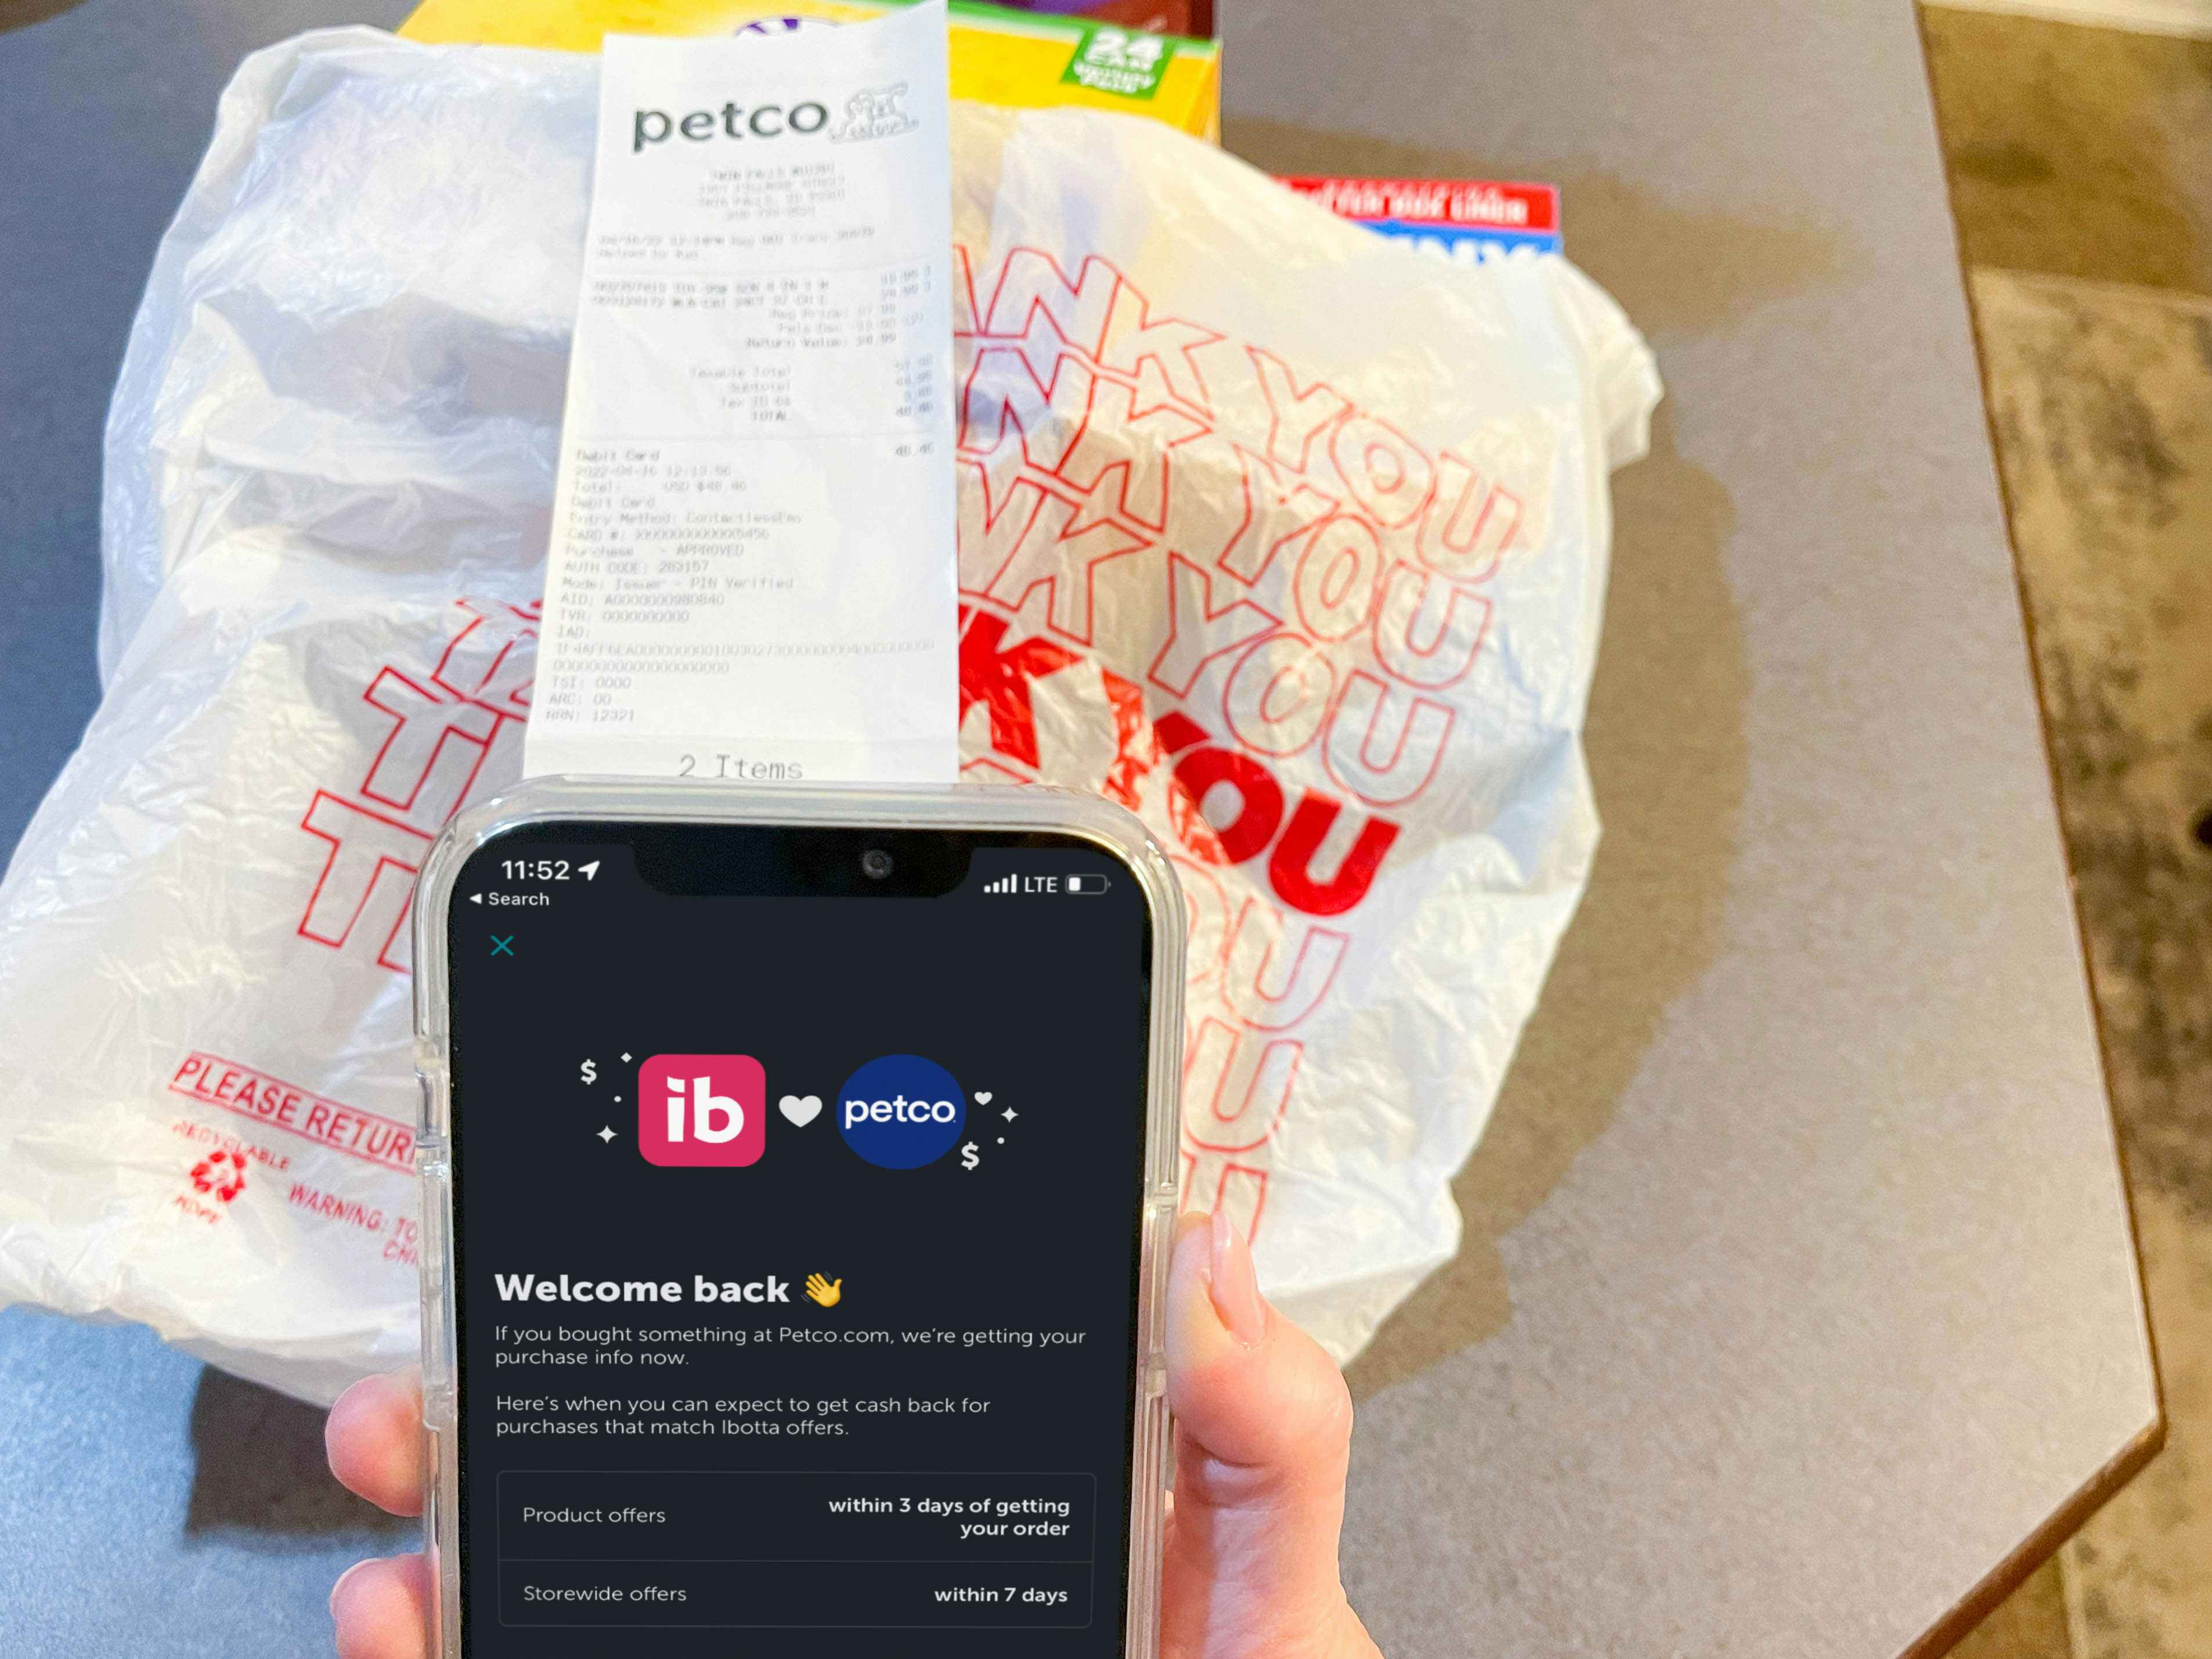 a person holding a cellphone with ibotta app ad petco on screen with bag of items and petco receipt in background